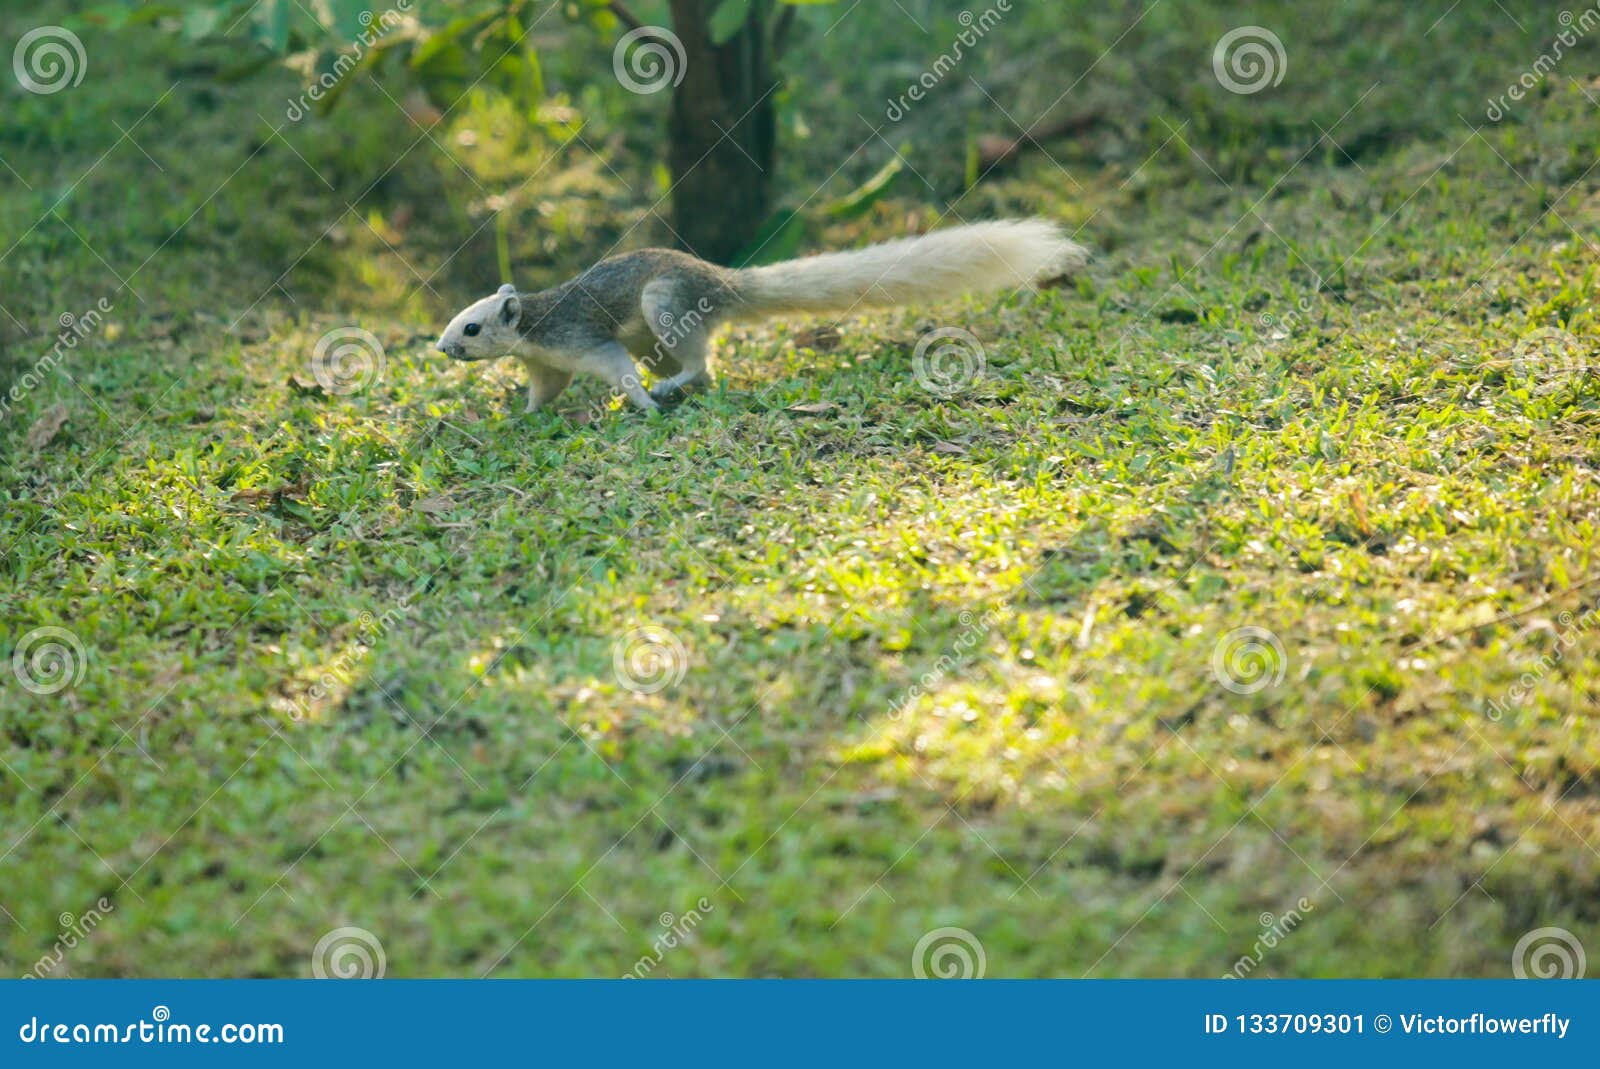 finlayson`s squirrel the variable squirrel is canopy-dweller rodent, normally feeding on fruit, in southeast asia. it inhabits a